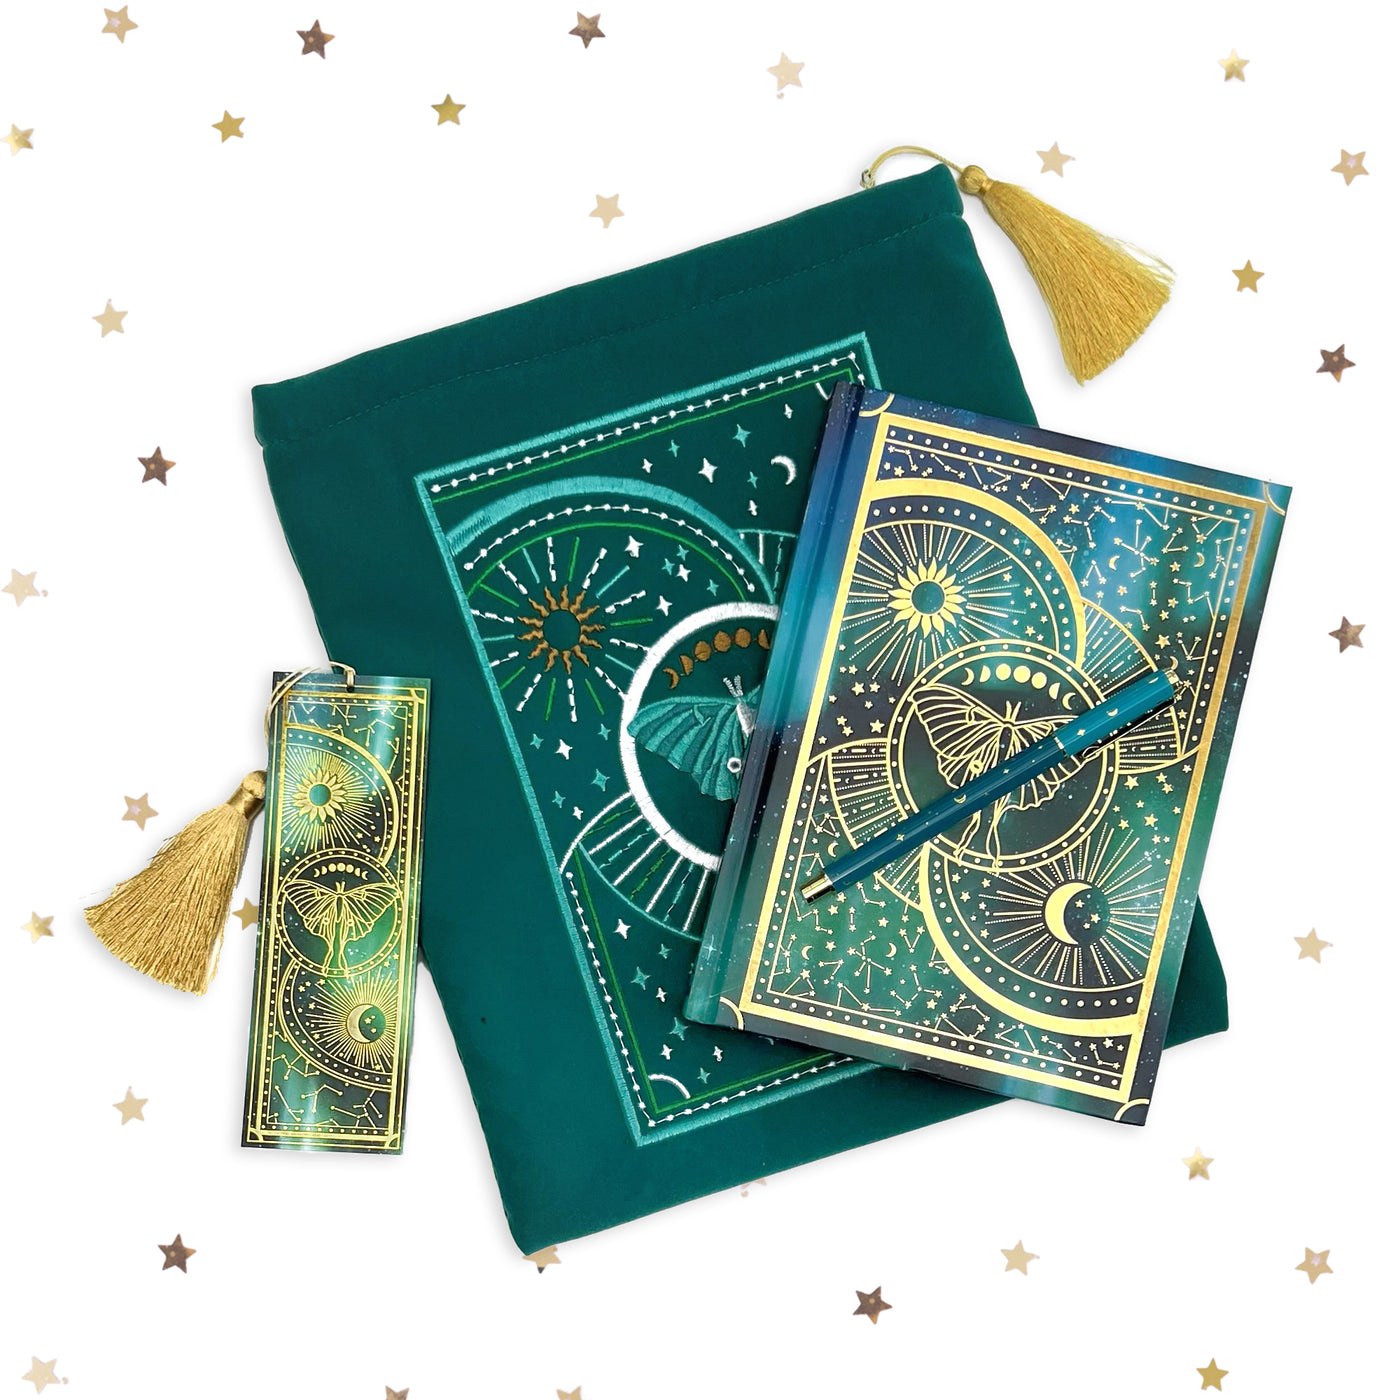 Luna Moth Stationery Bundle - Bookmark - Book Sleeve - iPad Sleeve - Kindle Sleeve - Journal - Notebook - Pen - The Quirky Cup Collective